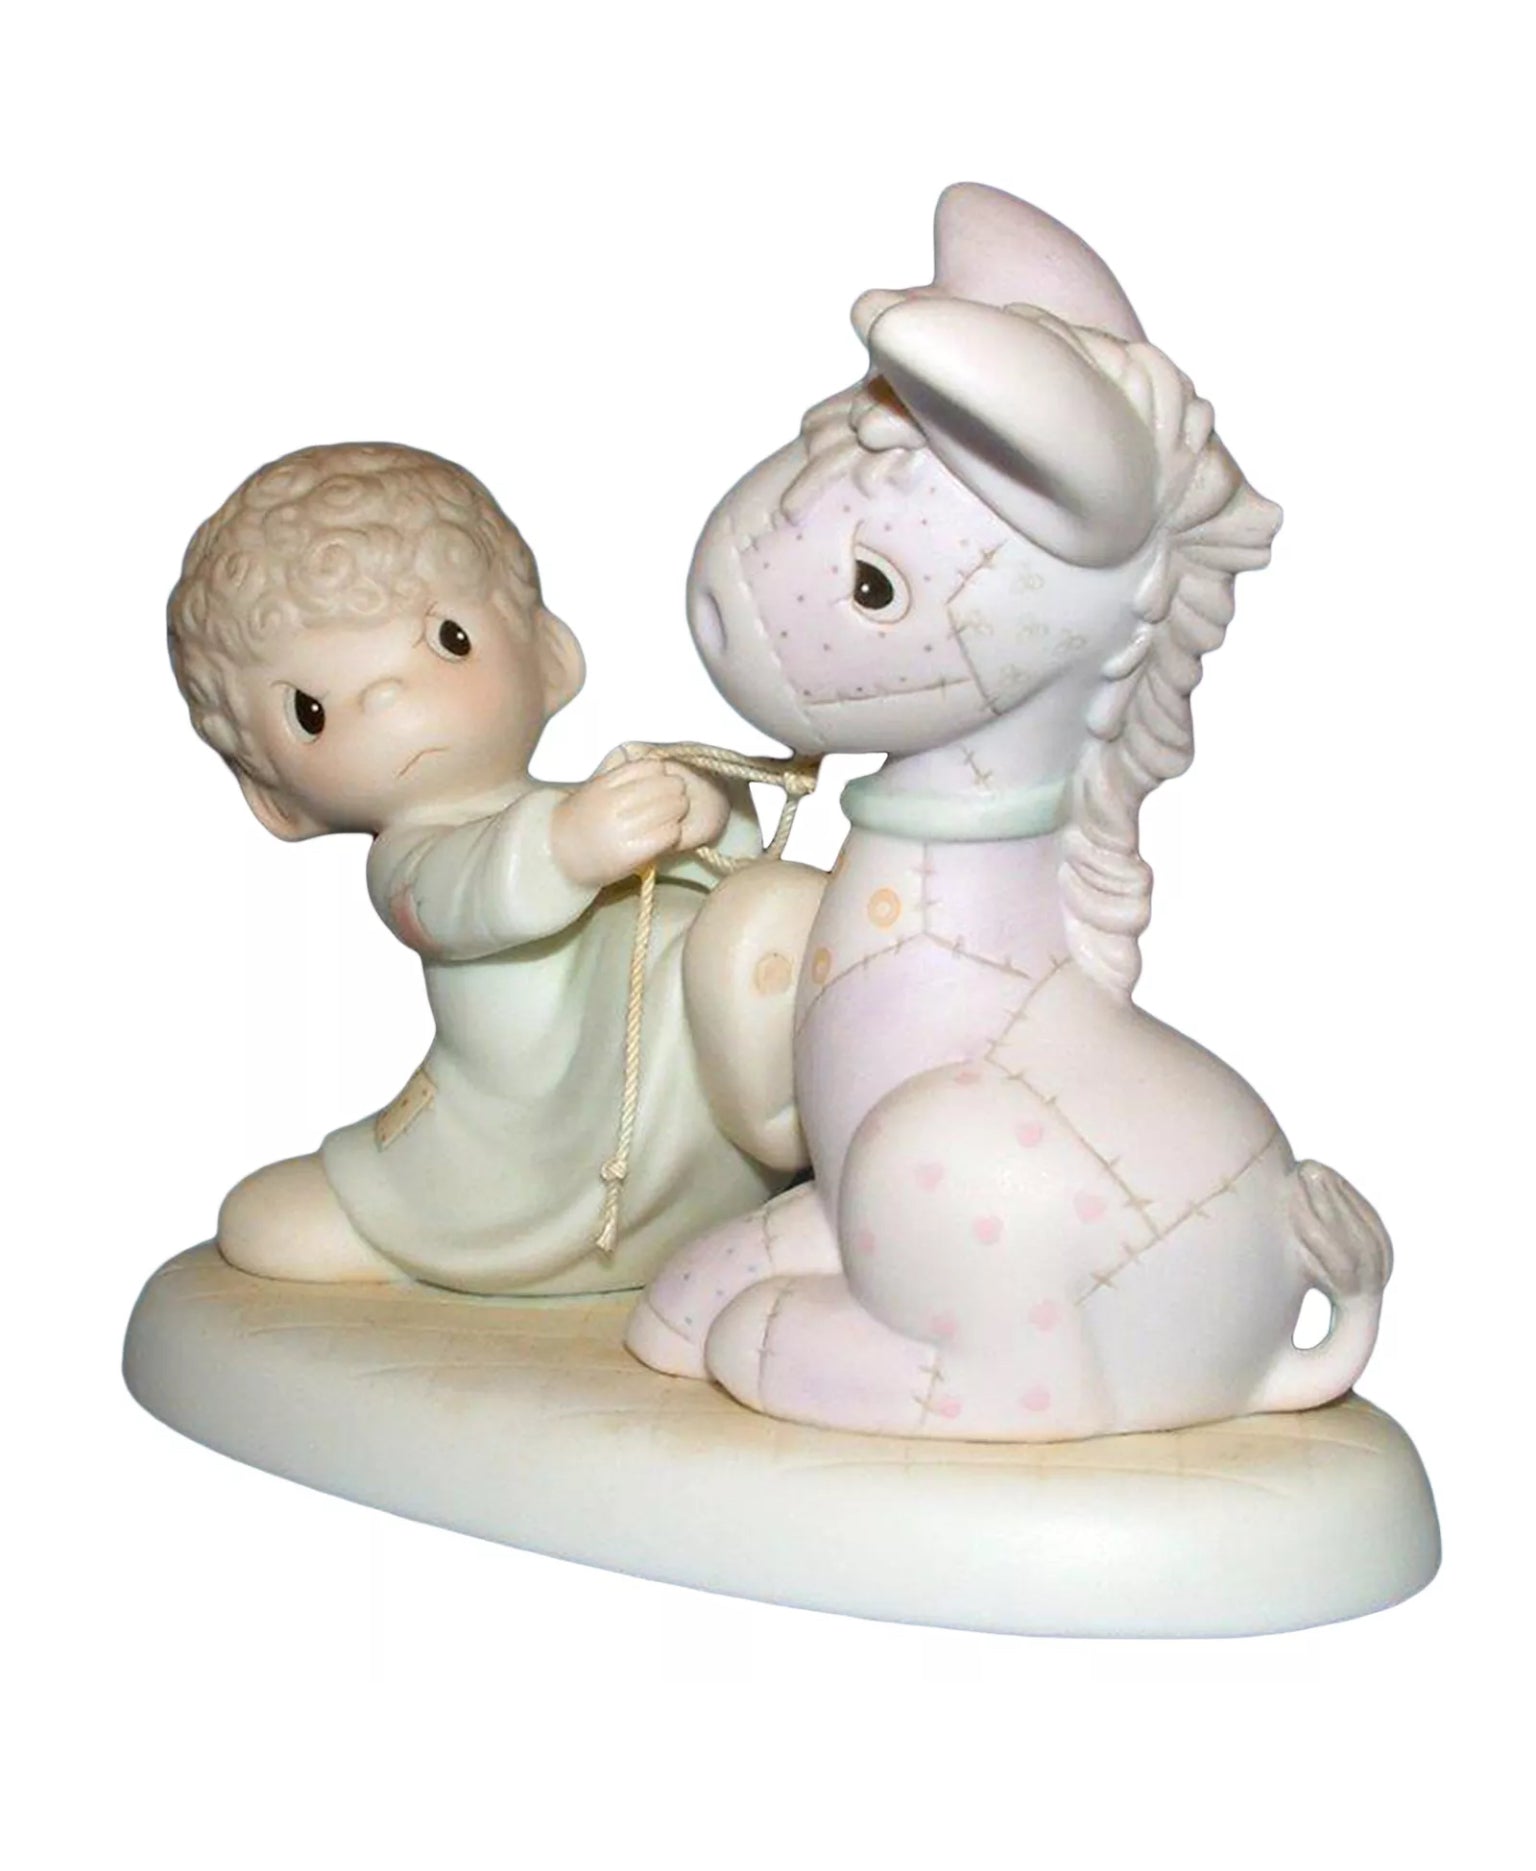 We're Pulling For You - Precious Moment Figurine